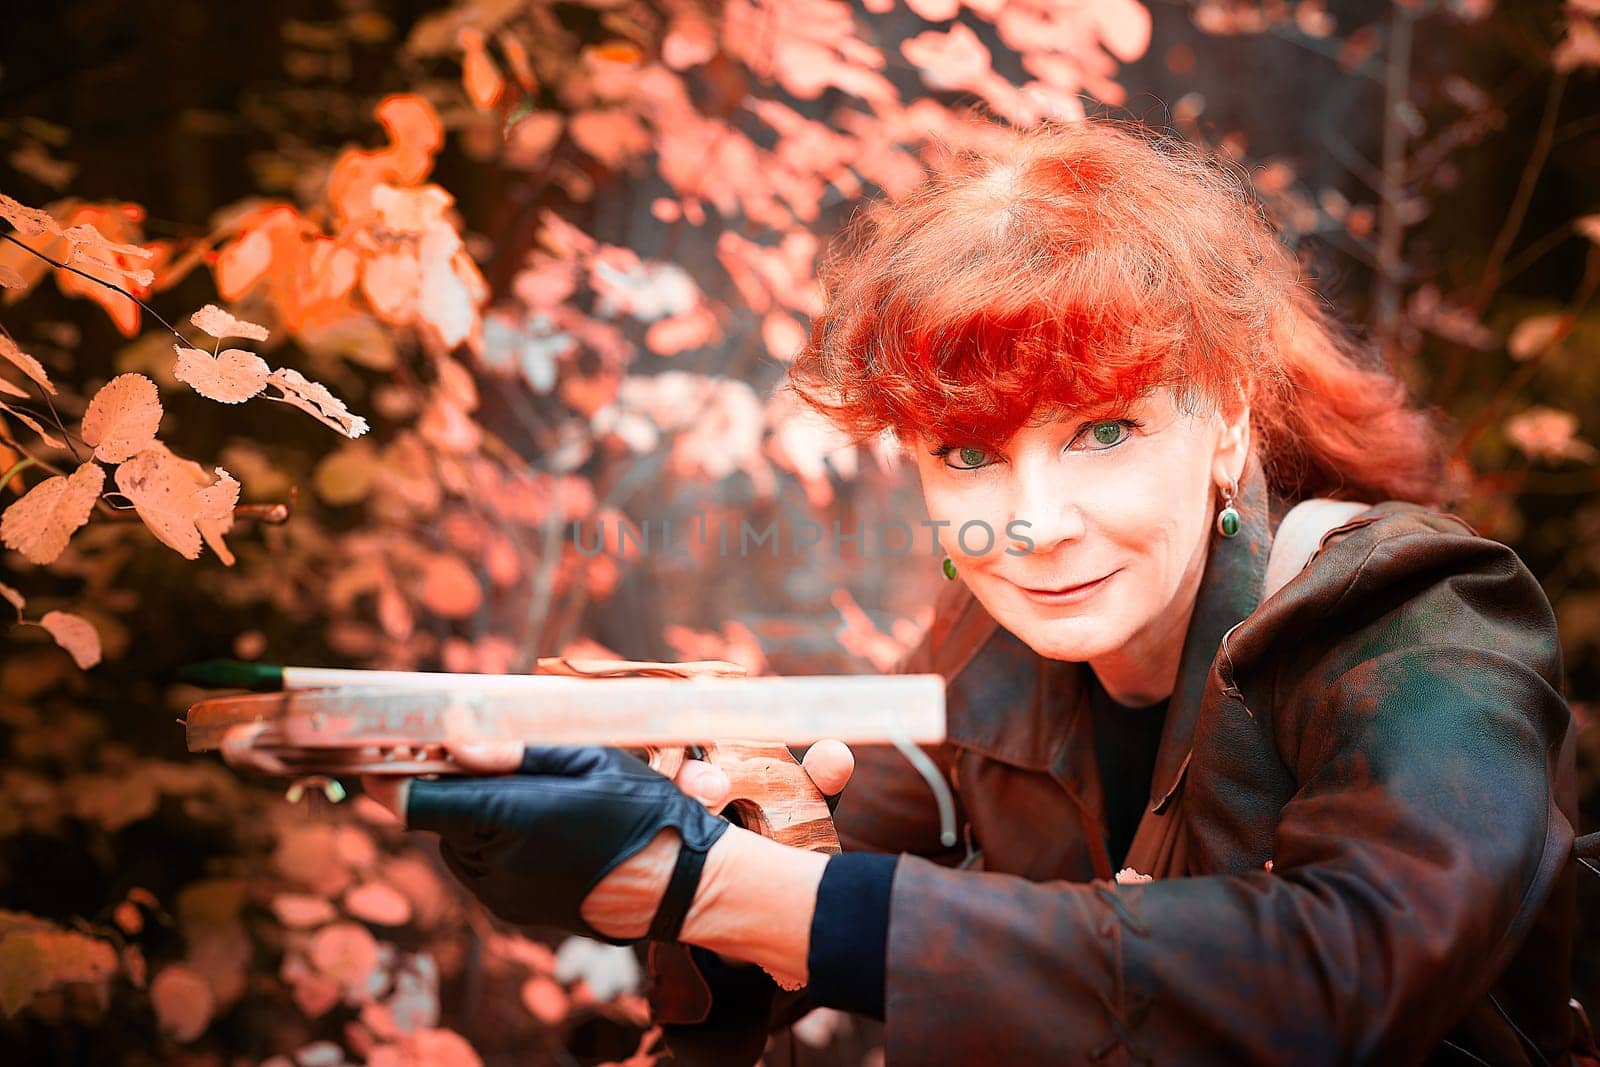 Mature model portraying a royal huntress with red curve hair is hunting with a crossbow in the in vibrant autumn forest in thematic photo shoot